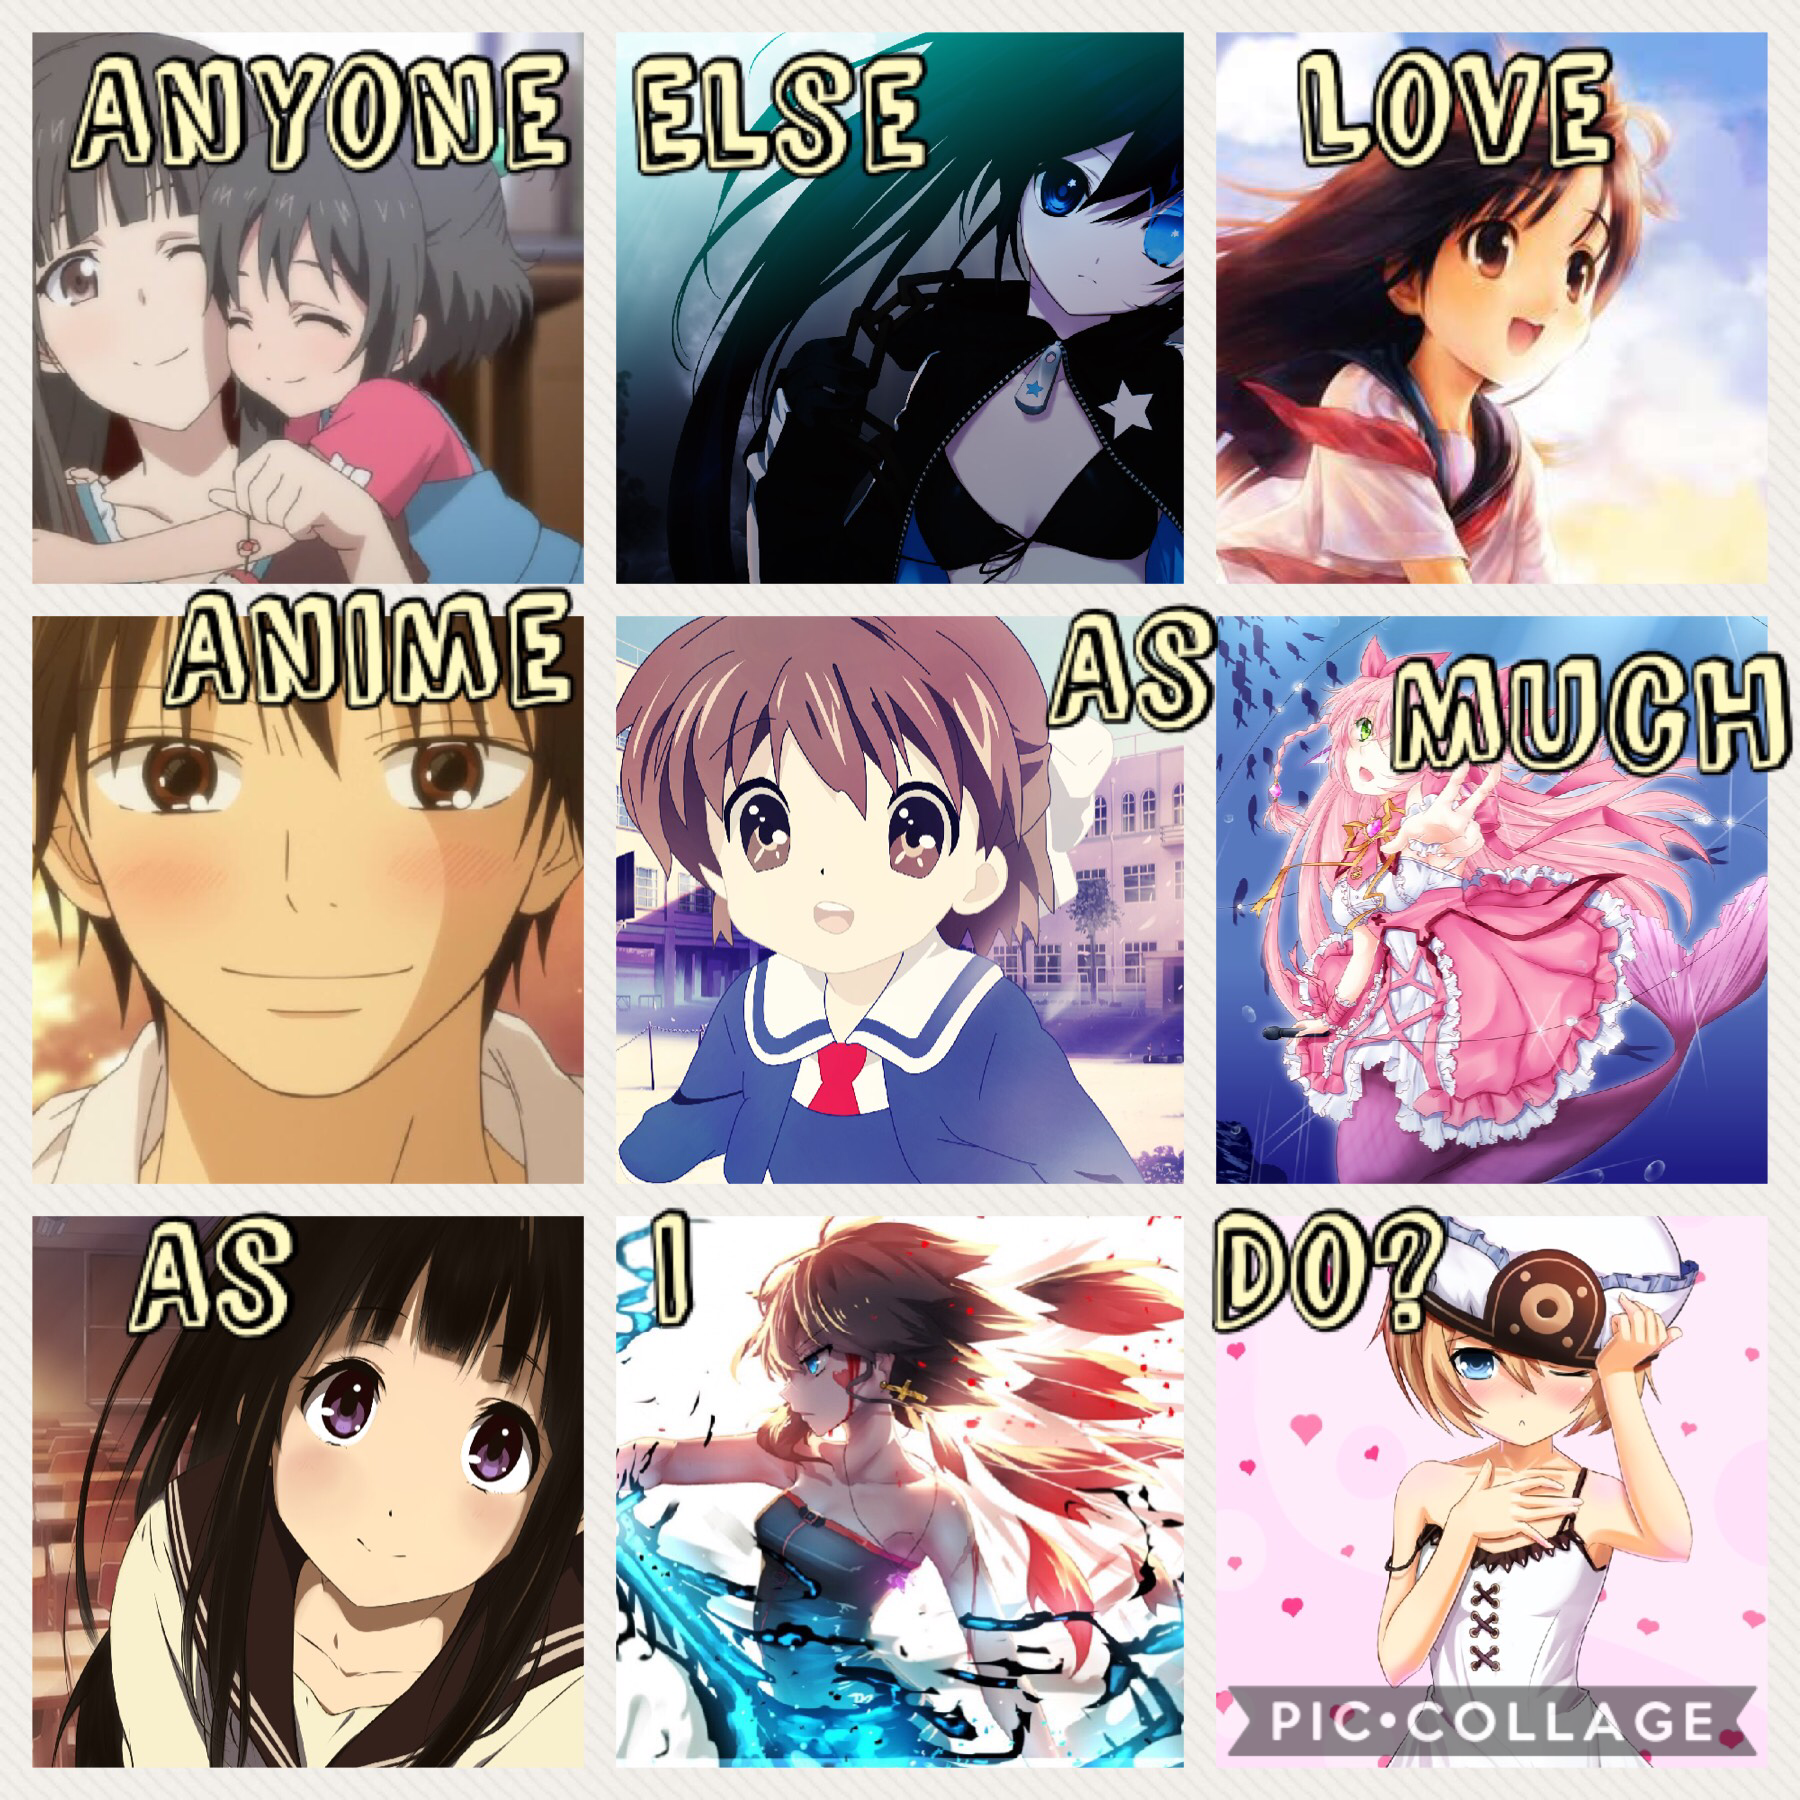 Comment have fav anime is urs